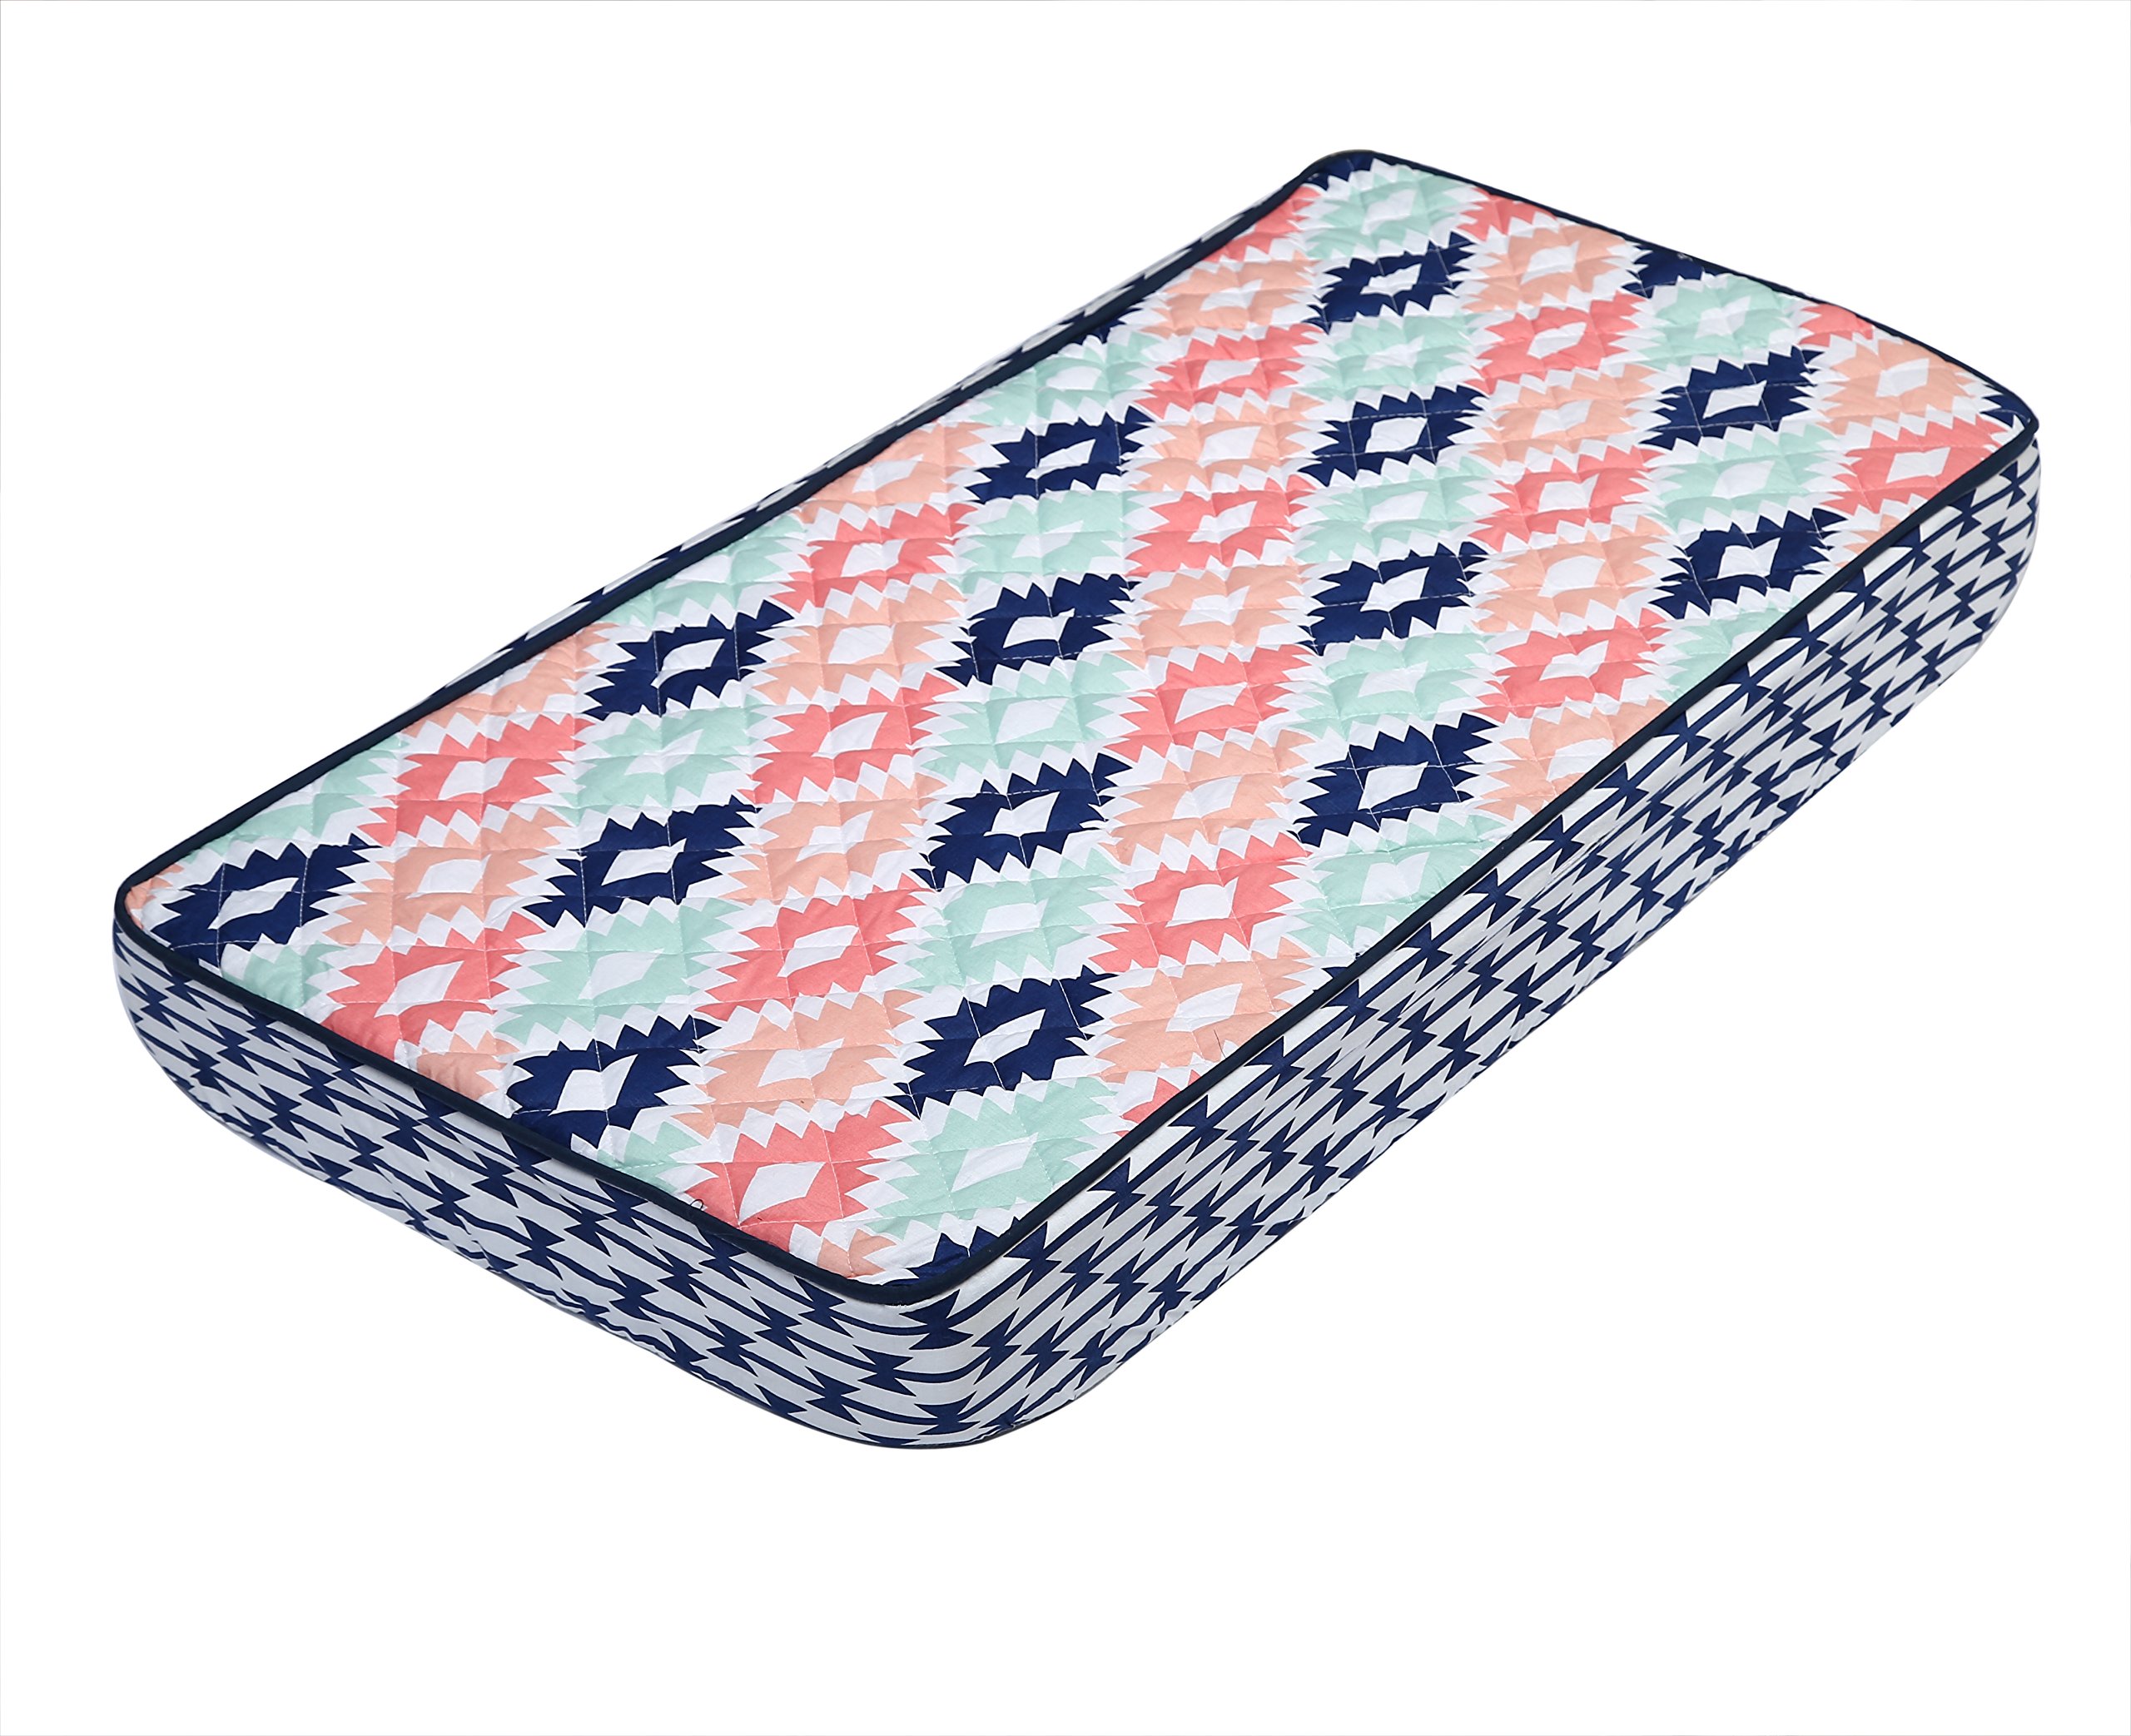 Bacati - Emma Aztec Kilim Coral/Mint/Navy Quilted Changing Pad Cover